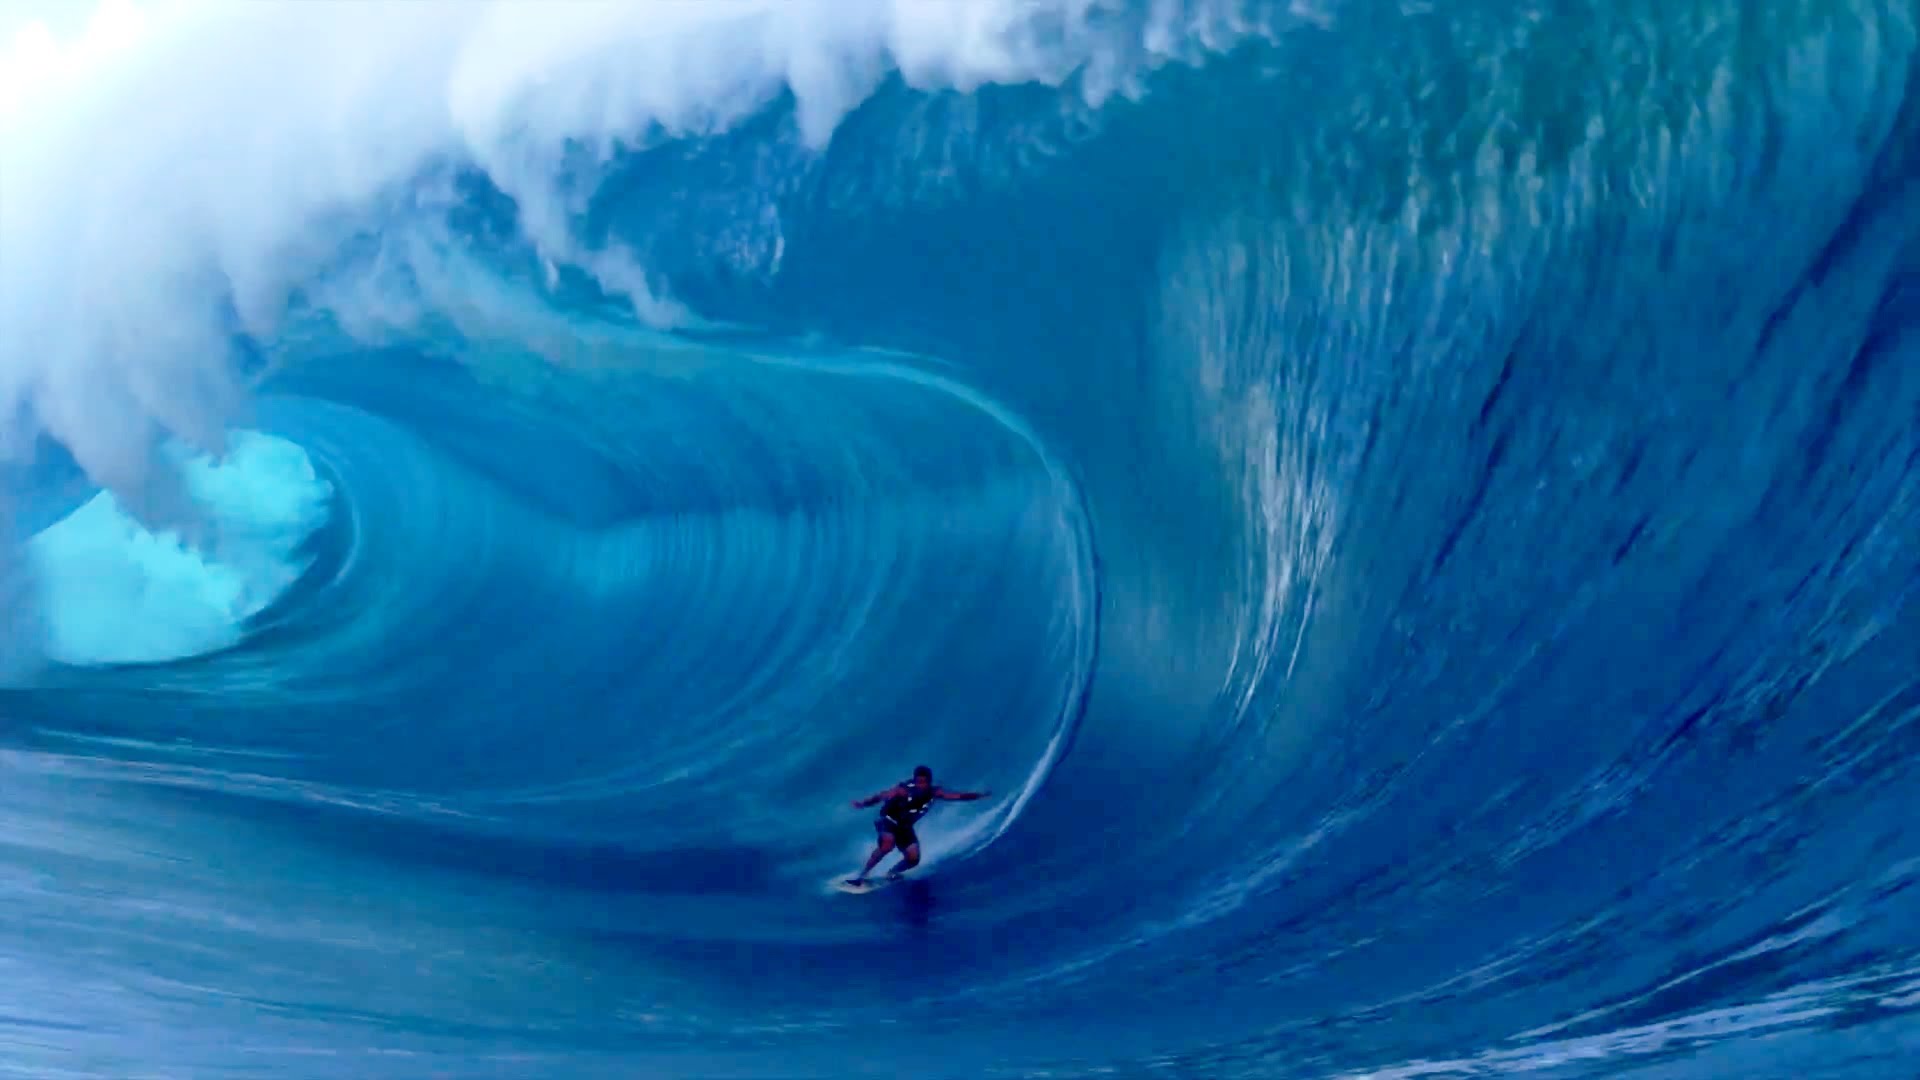 Surfing Heavy Waves At Teahupo O